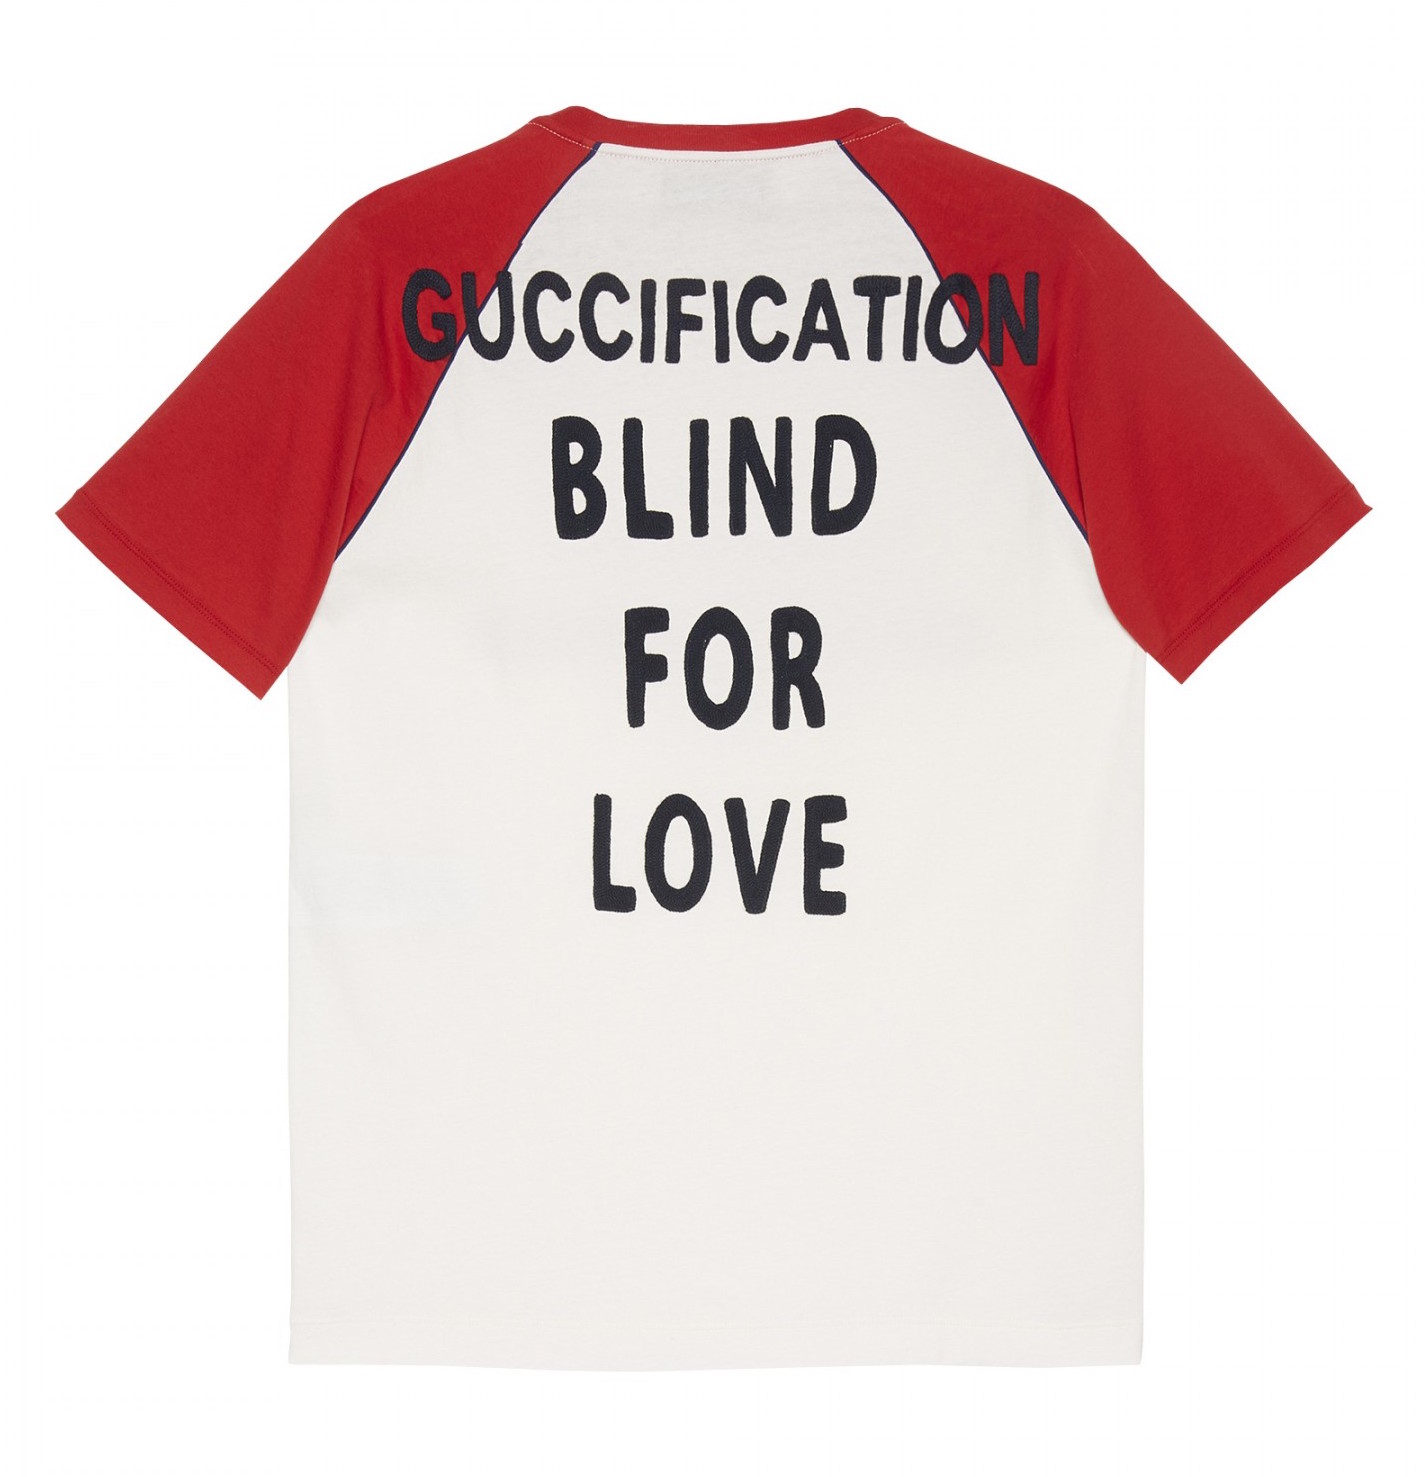 Gucci x DSM Guccification Blind for Love t-shirt